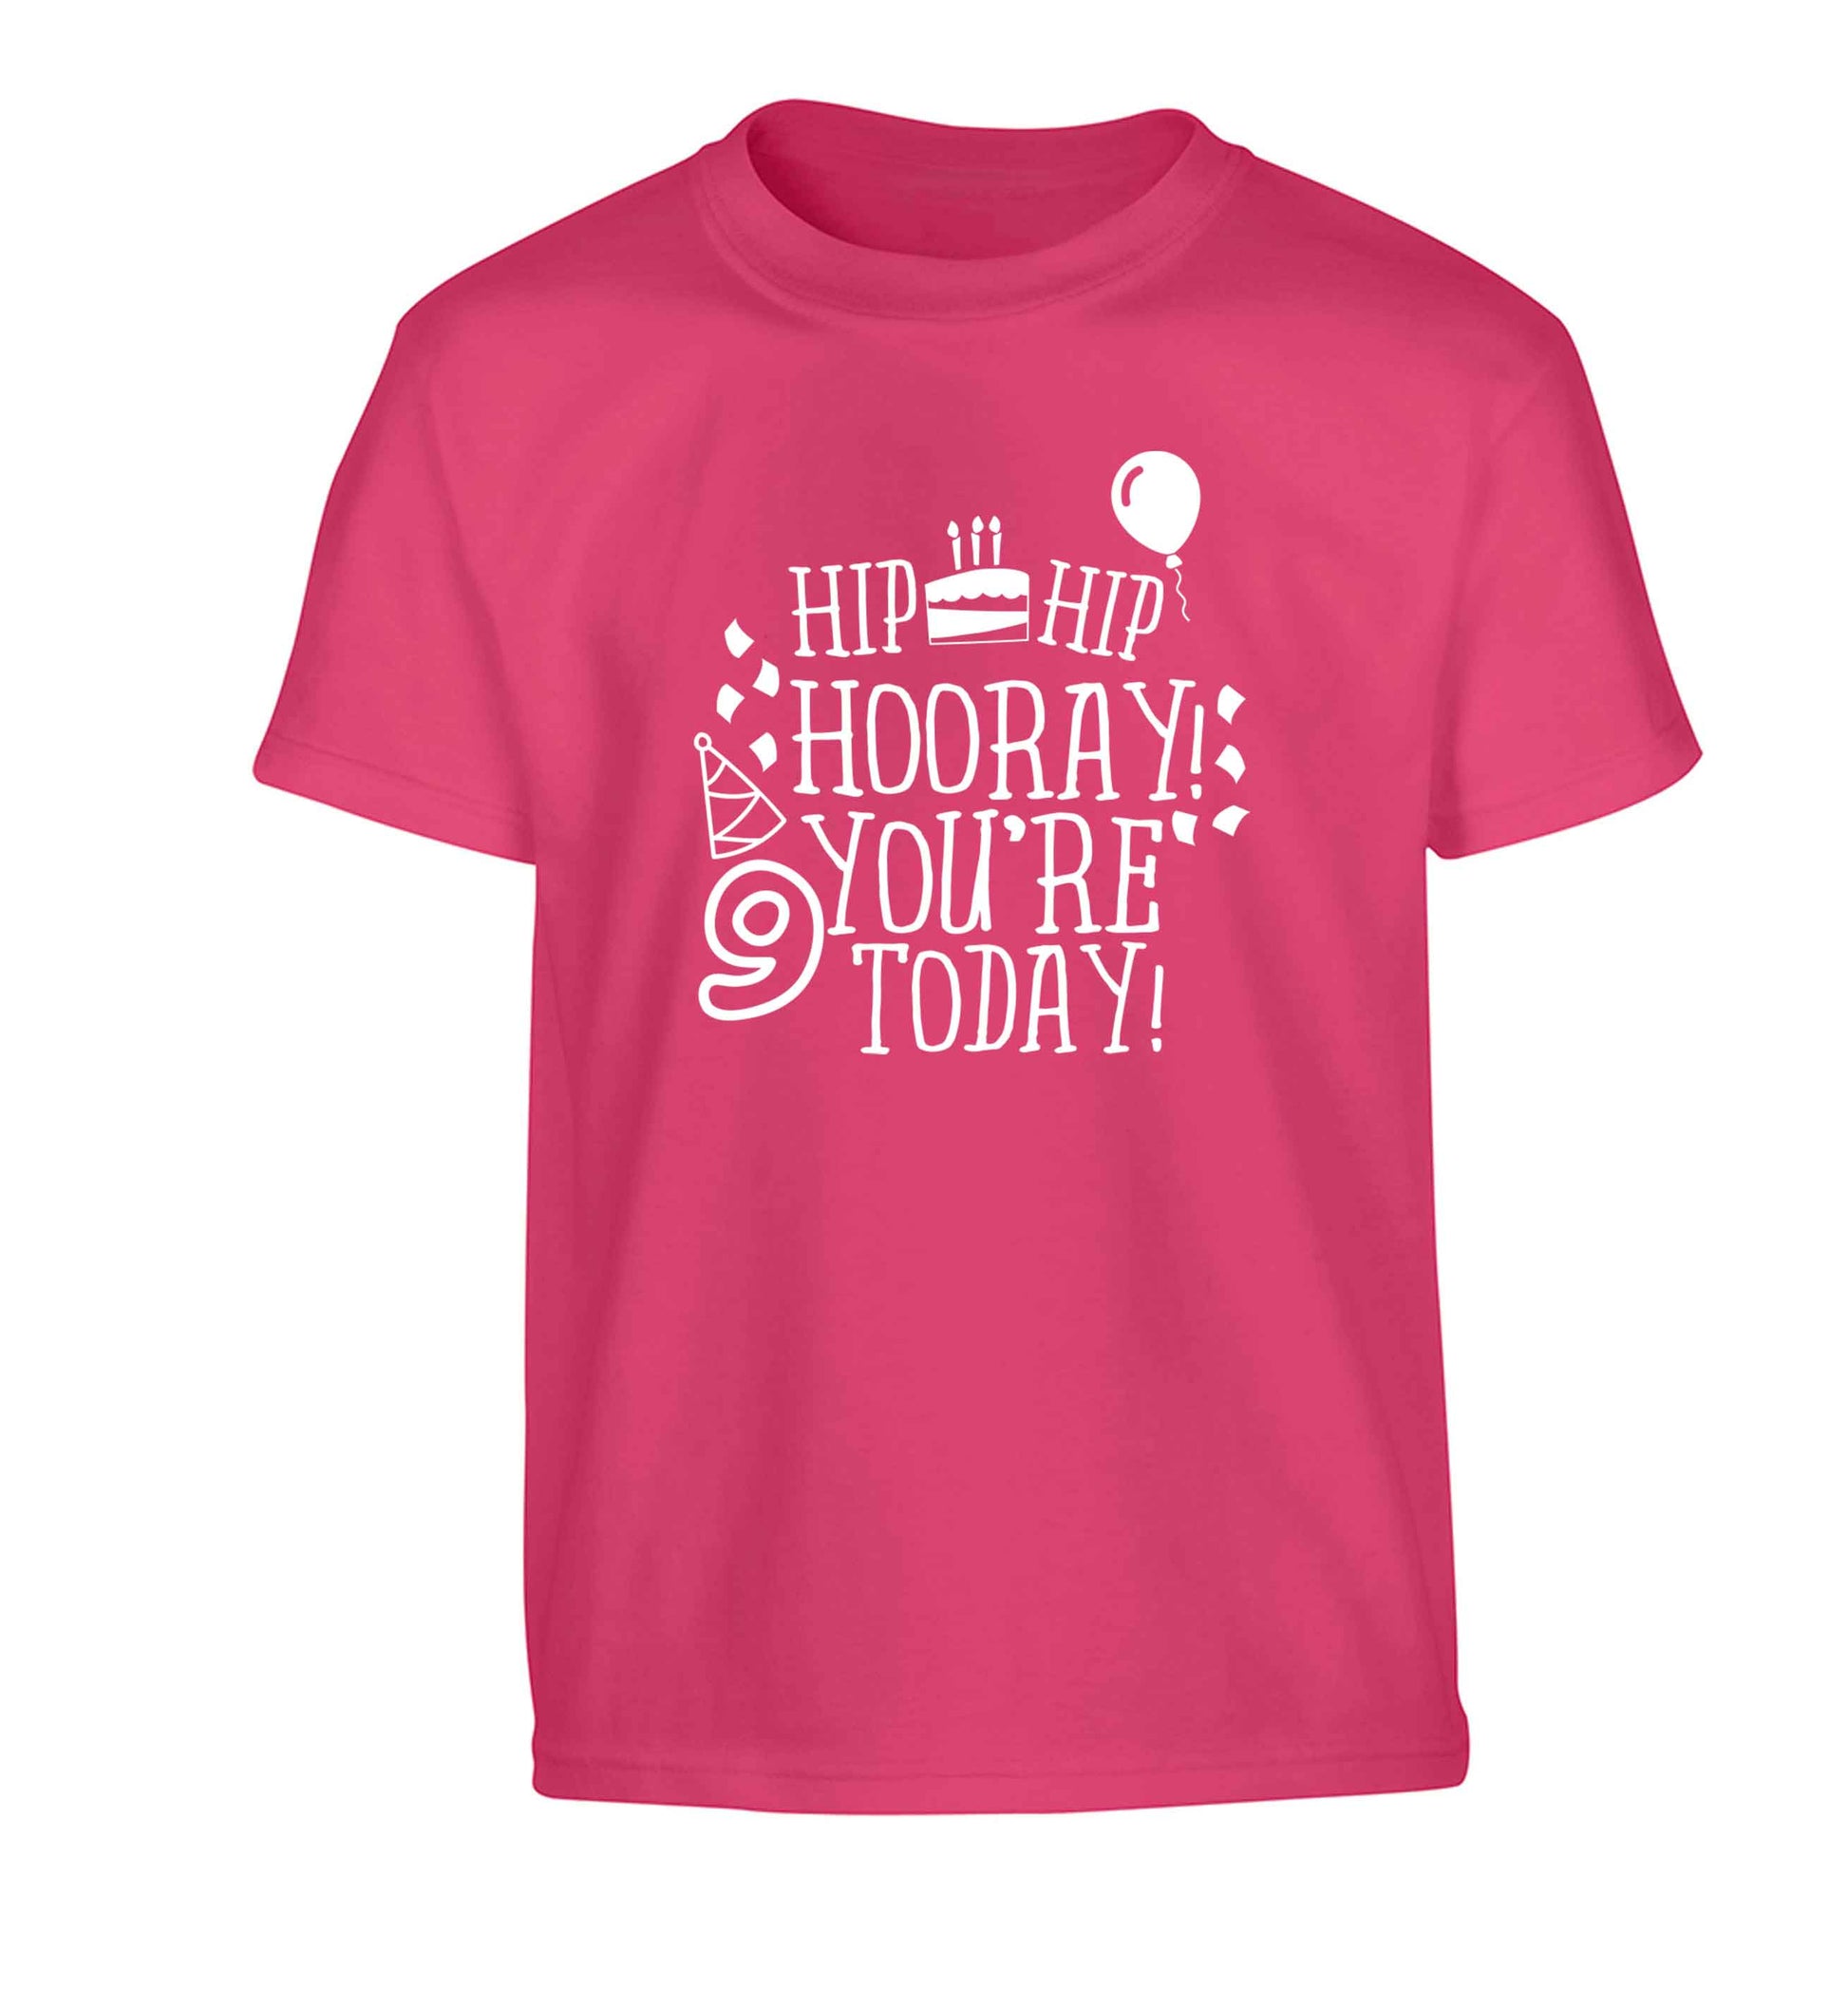 Hip hip hooray you're 9 today! Children's pink Tshirt 12-13 Years